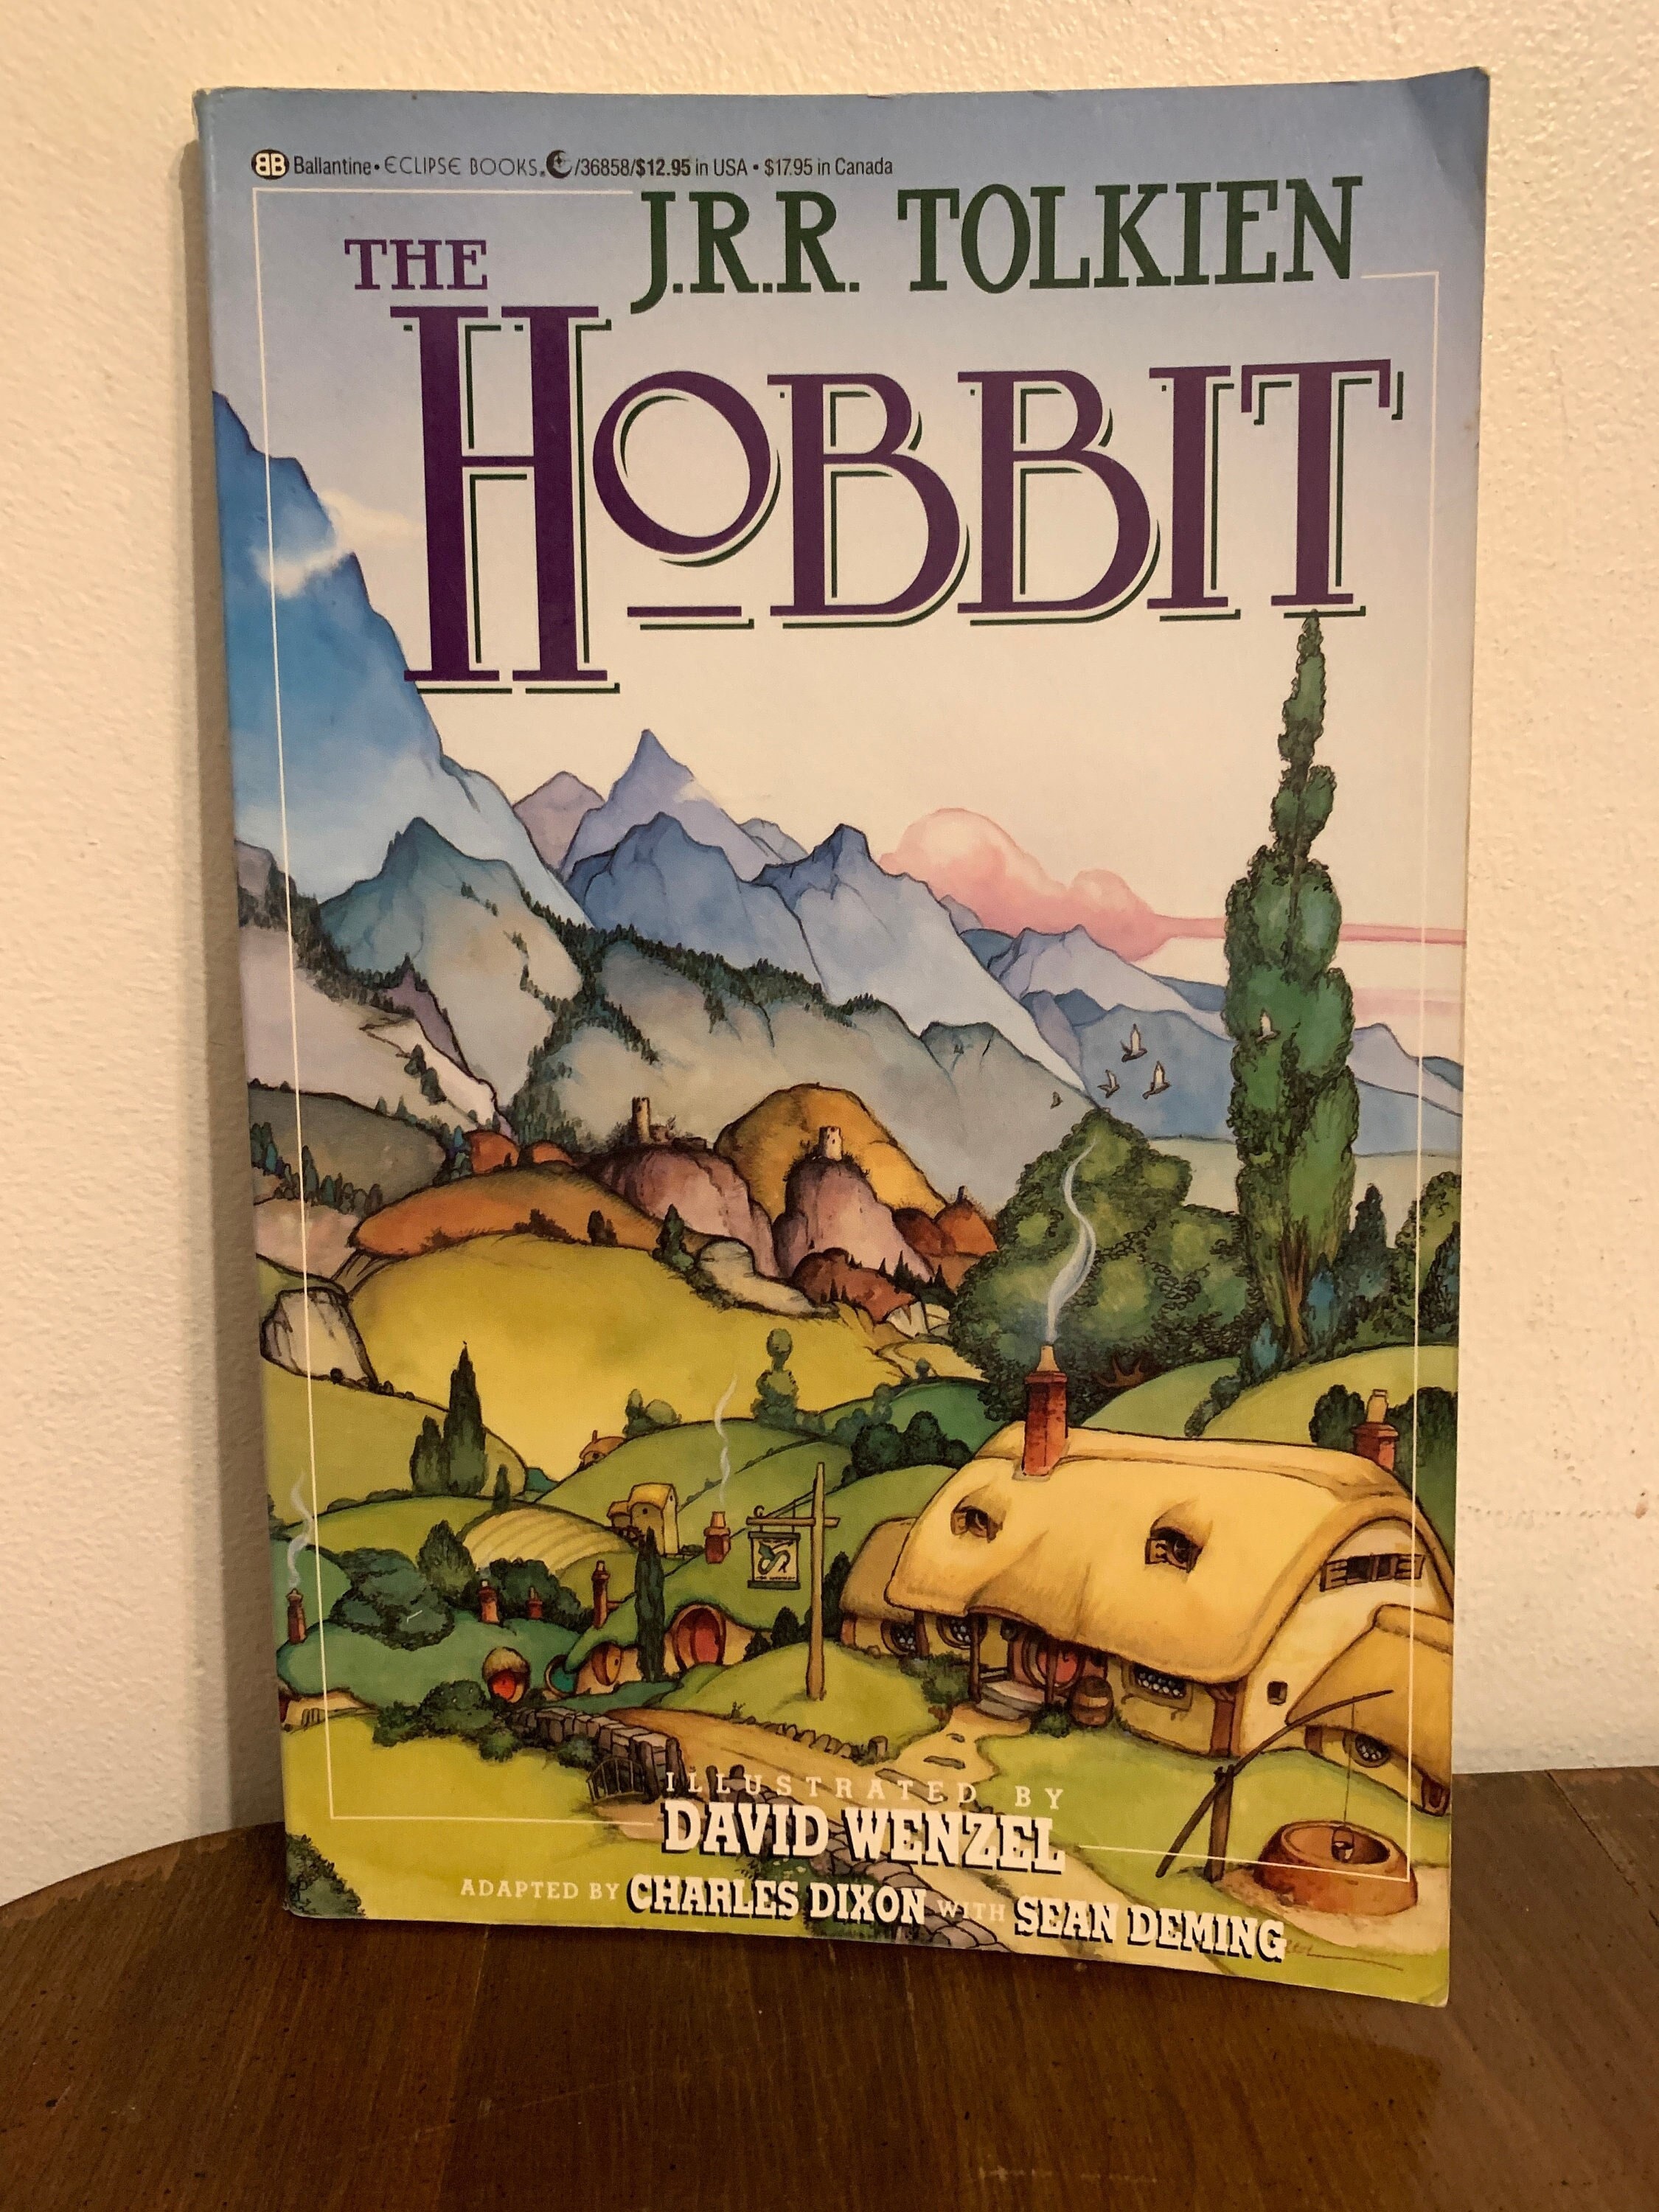 JRR Tolkien the Hobbit Illustrated by David Wenzel - Etsy Canada